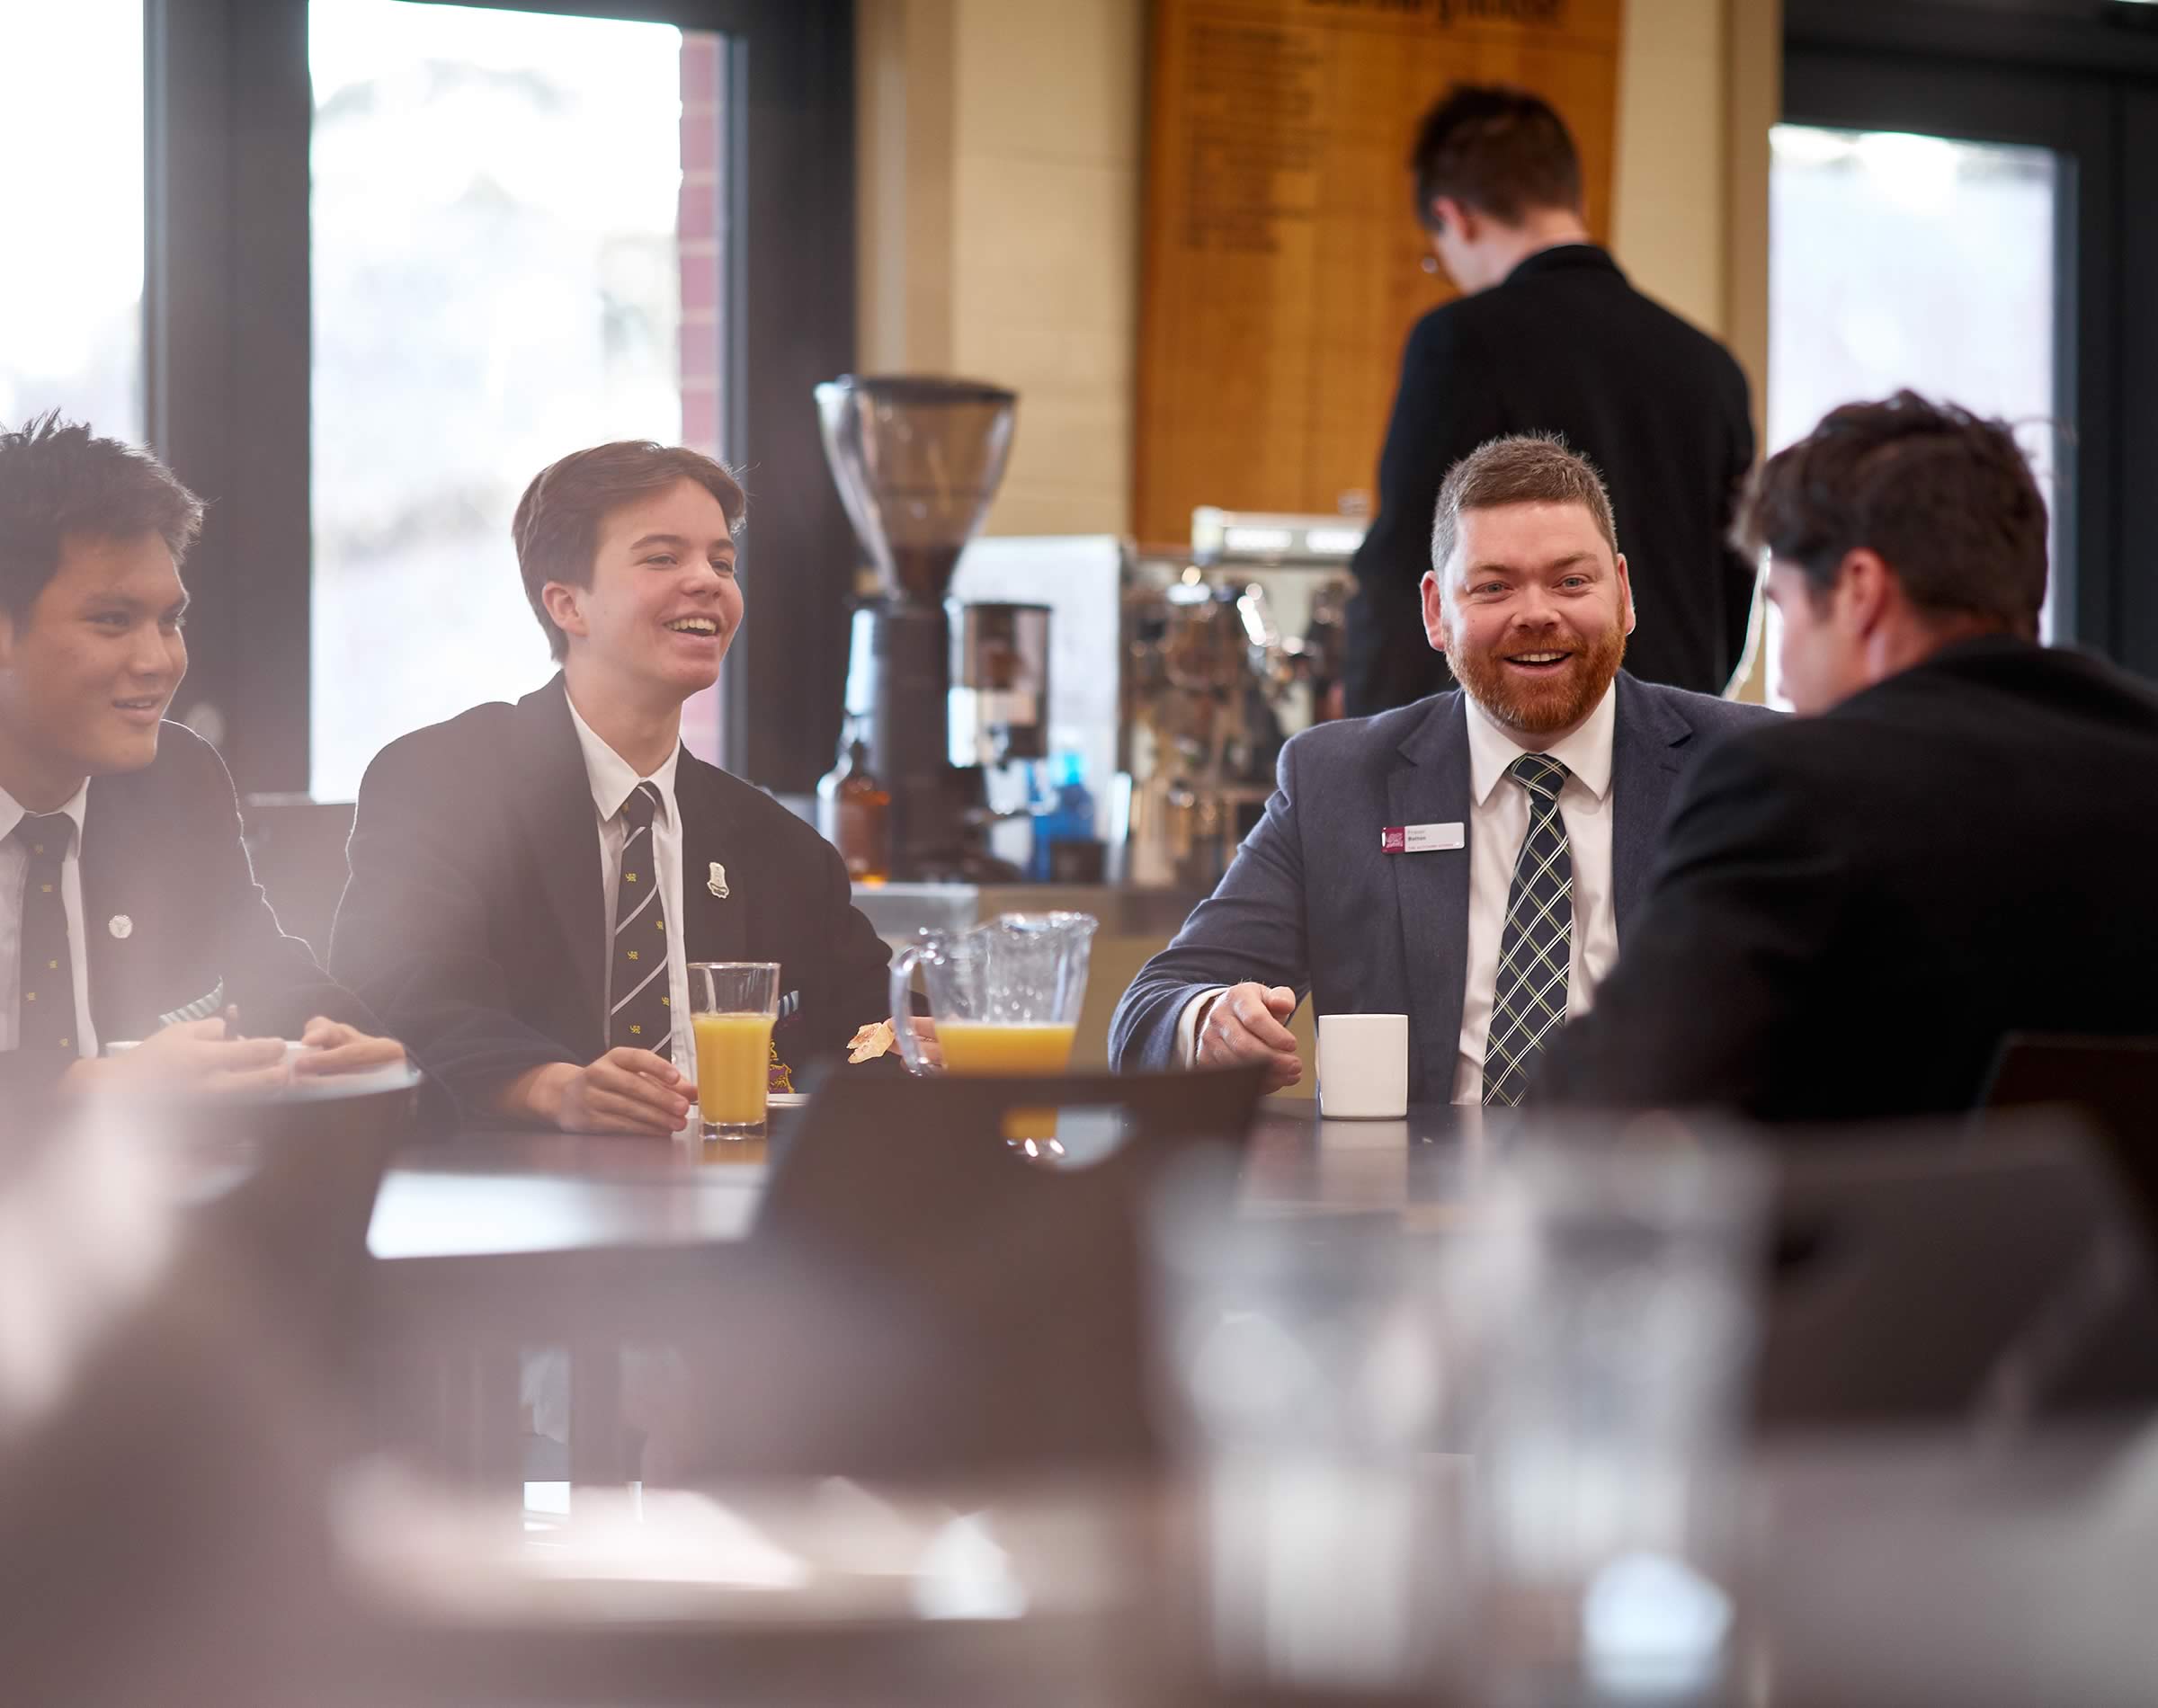 Mr Fraser Bolton, Head of Boarding, with students in Burbury House (boarding). Image: Joshua Lamont.